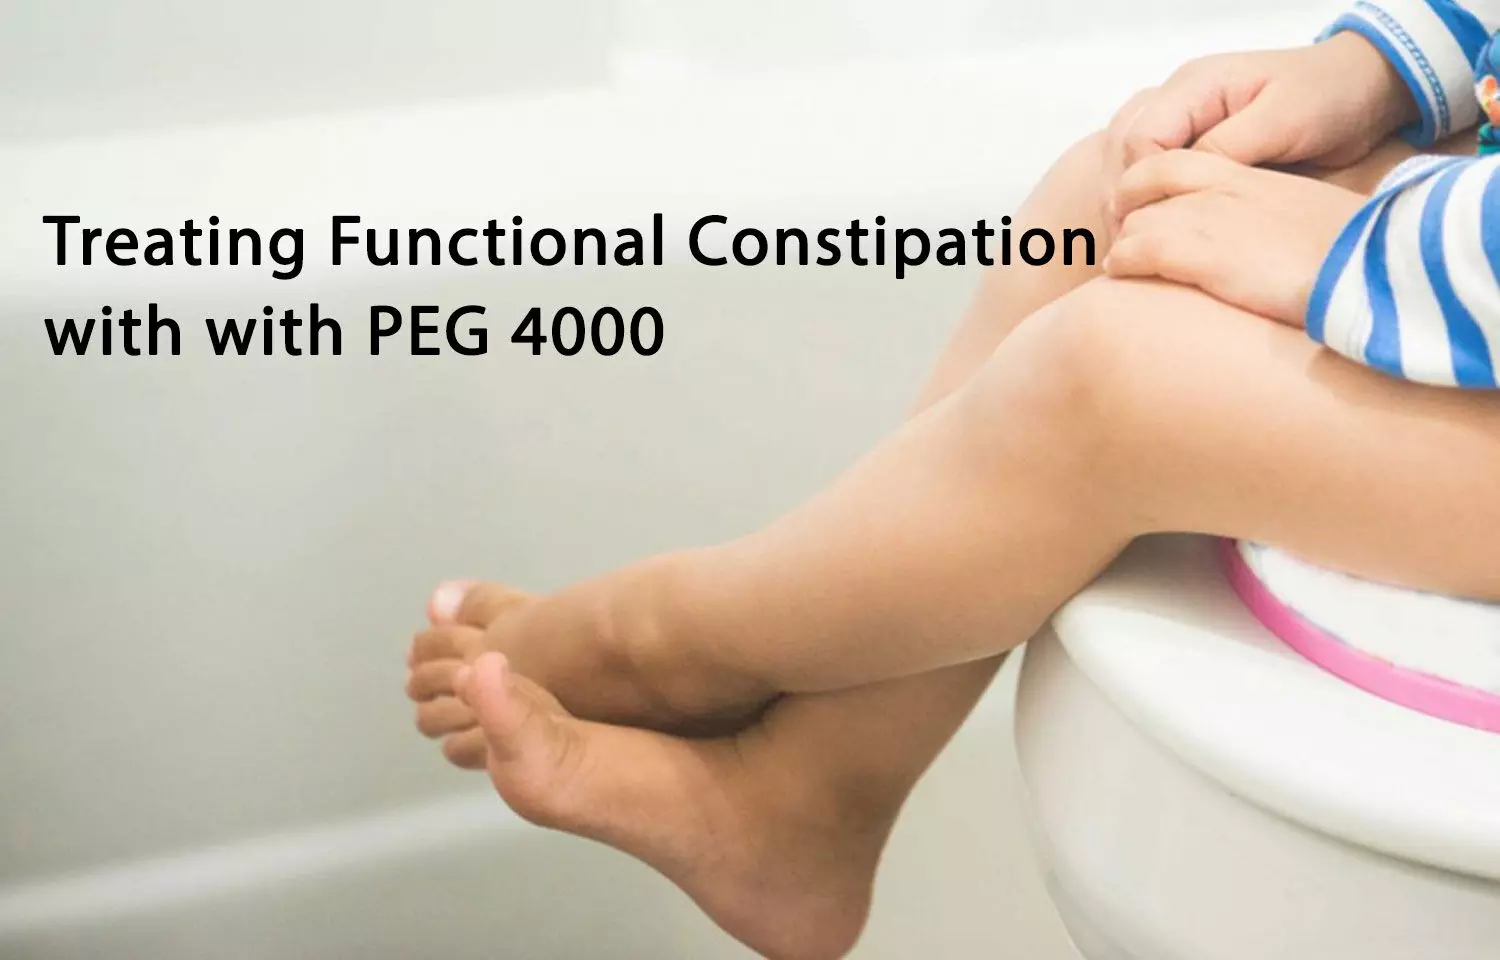 Long Term Treatment of children with chronic functional constipation with PEG 4000: Study